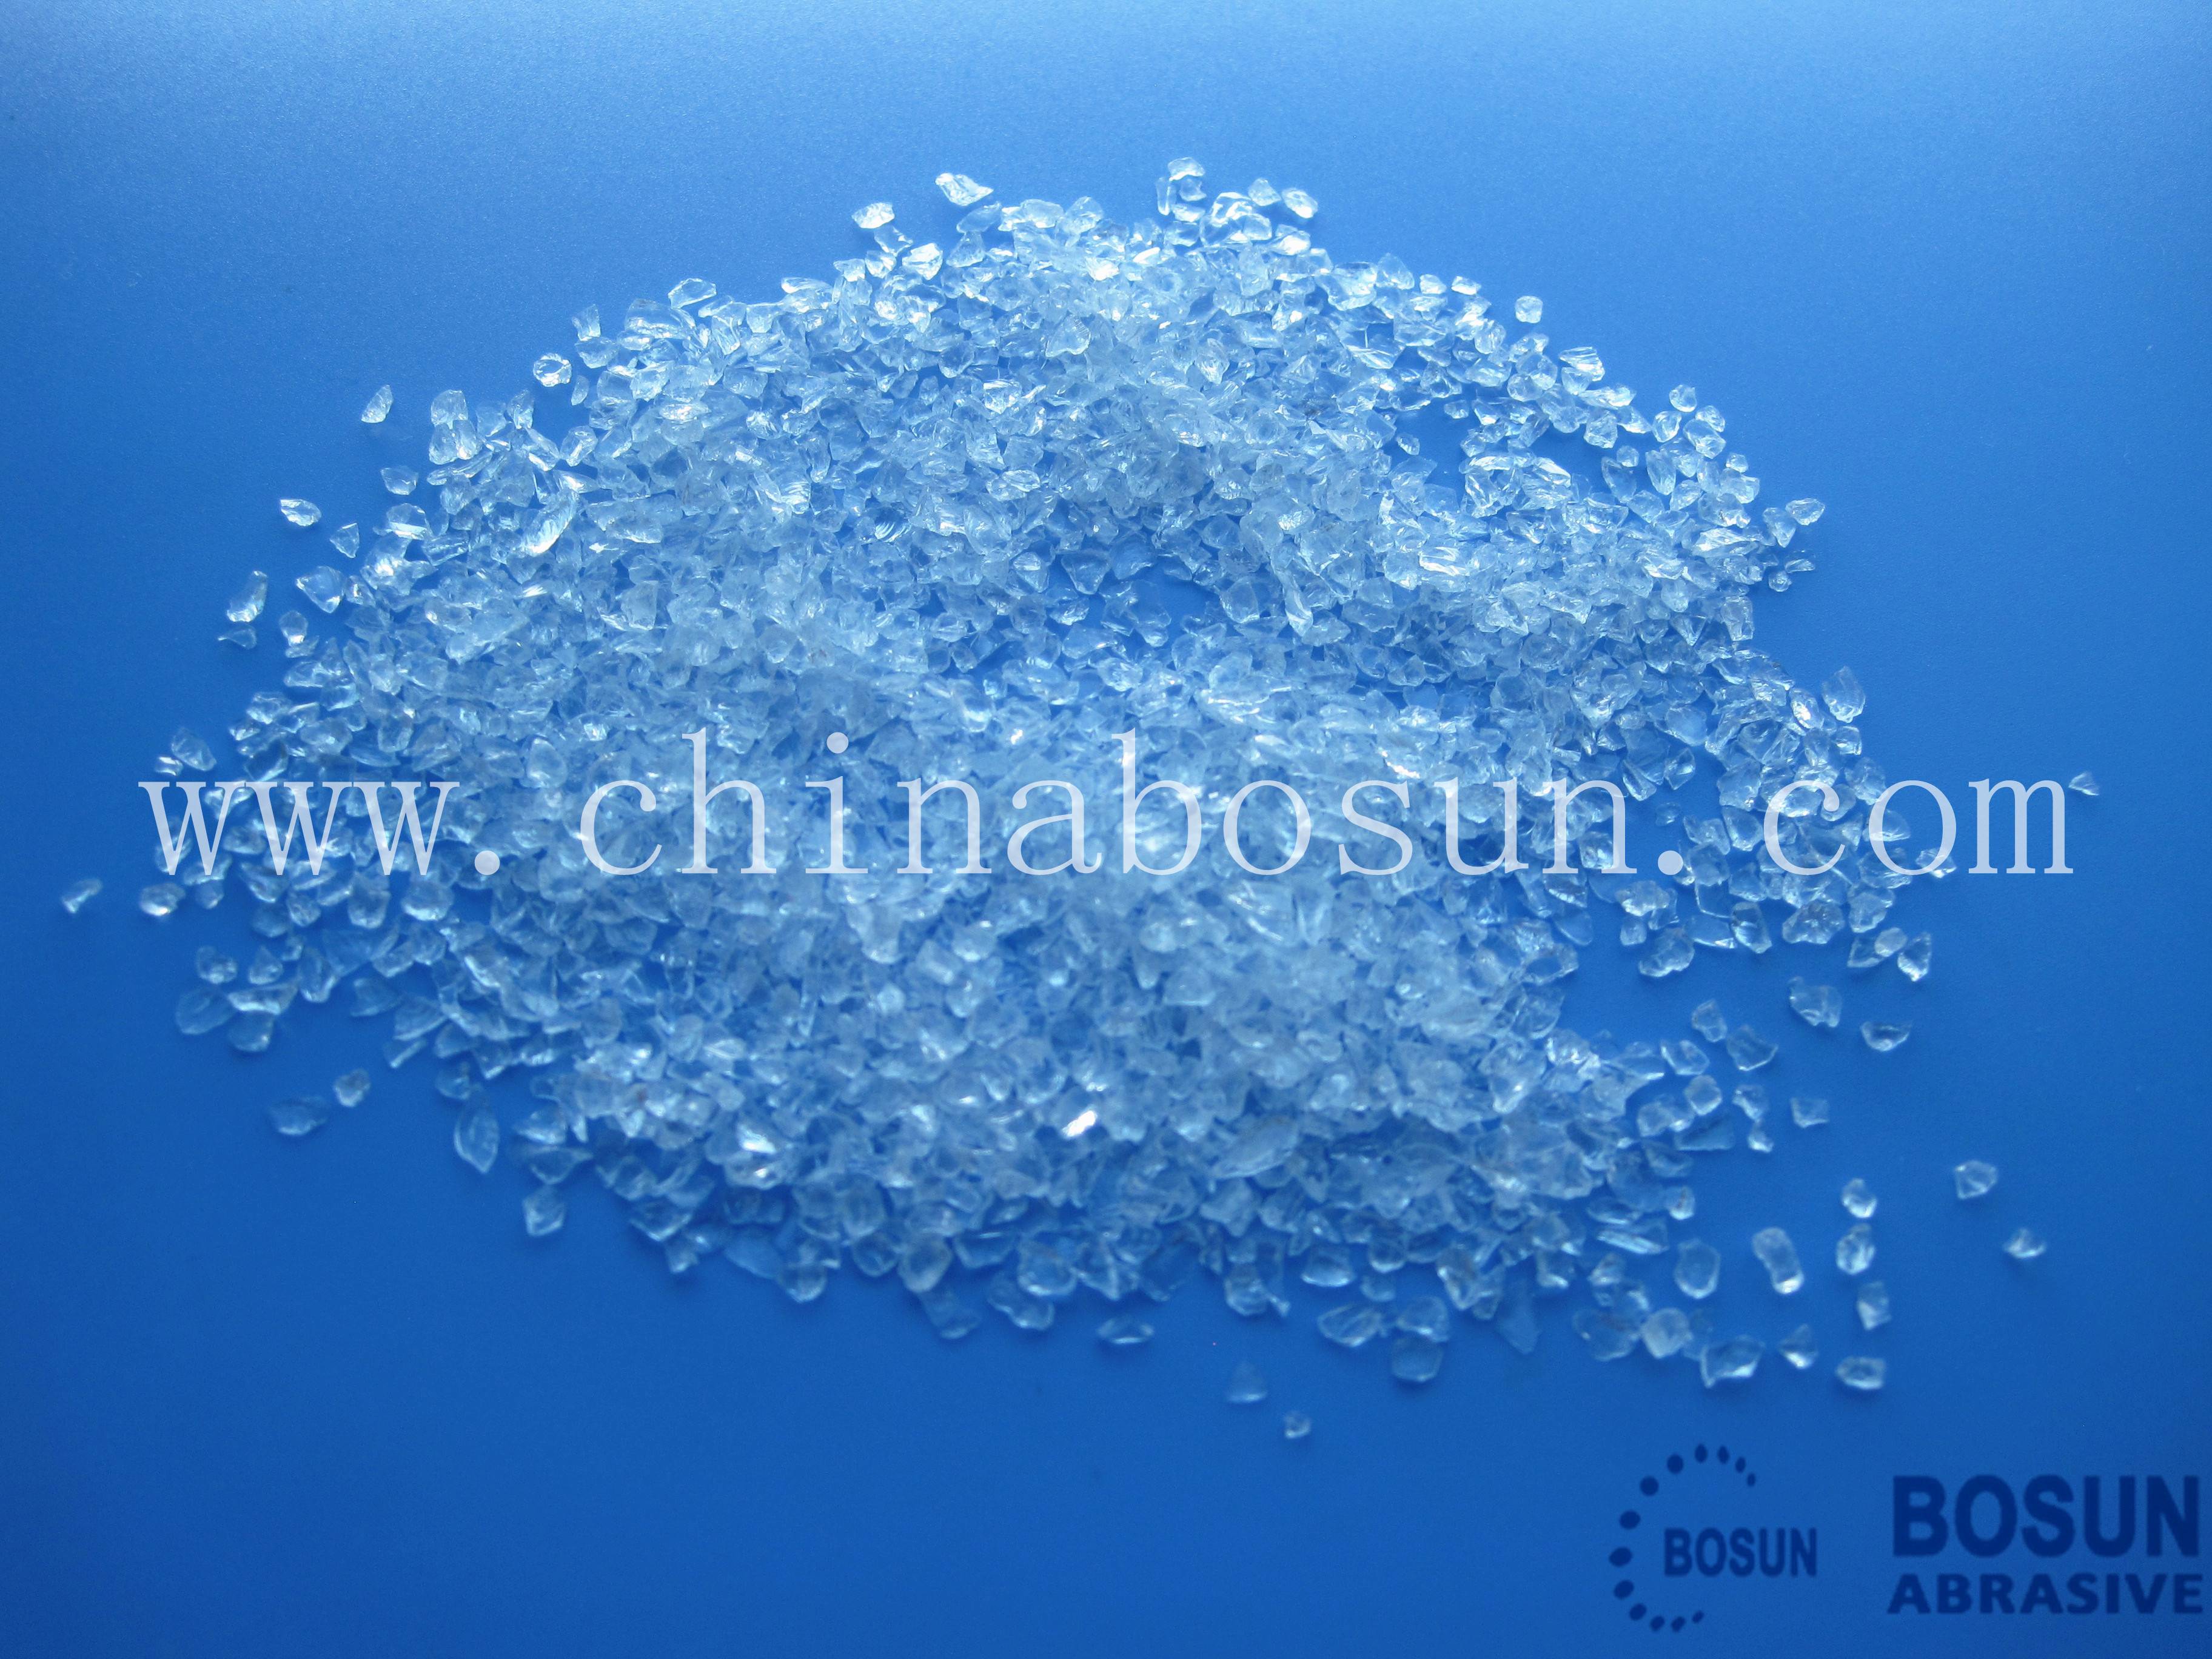 Discount Price Glass Beads 1.25-2.5MM to United States Factories